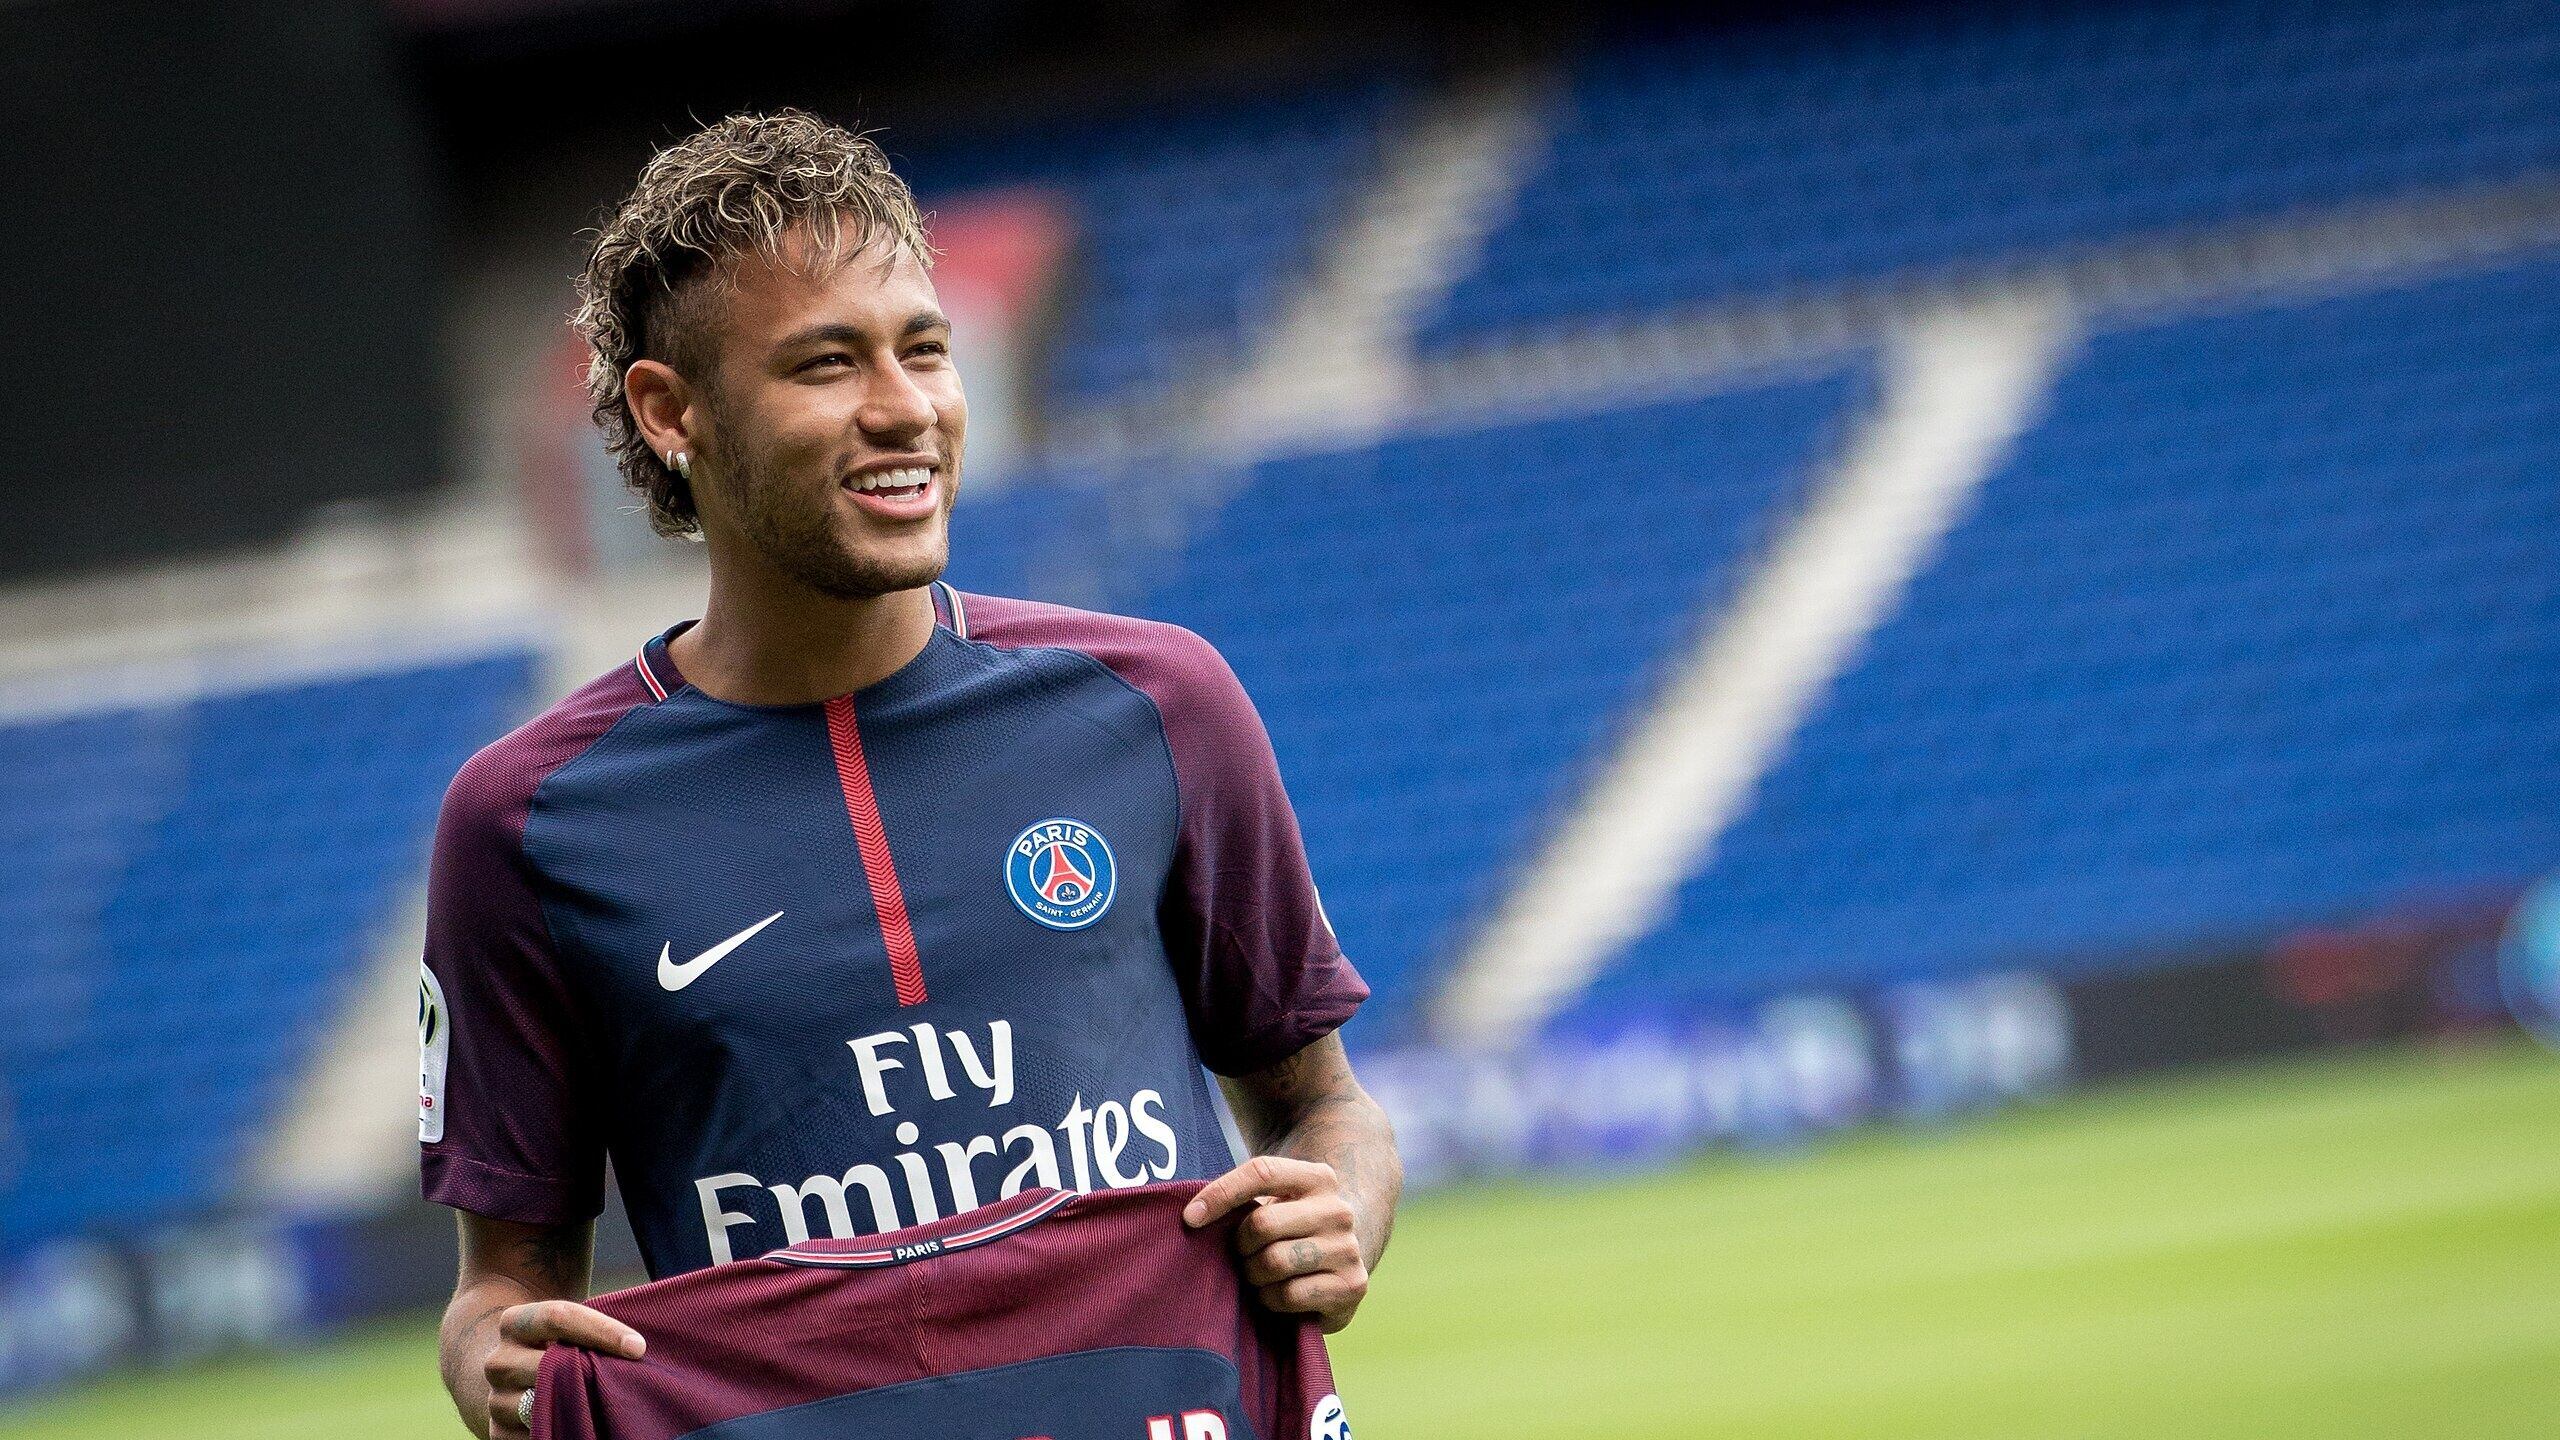 Neymar Jr's transfer from Barcelona to PSG being investigated by French authorities